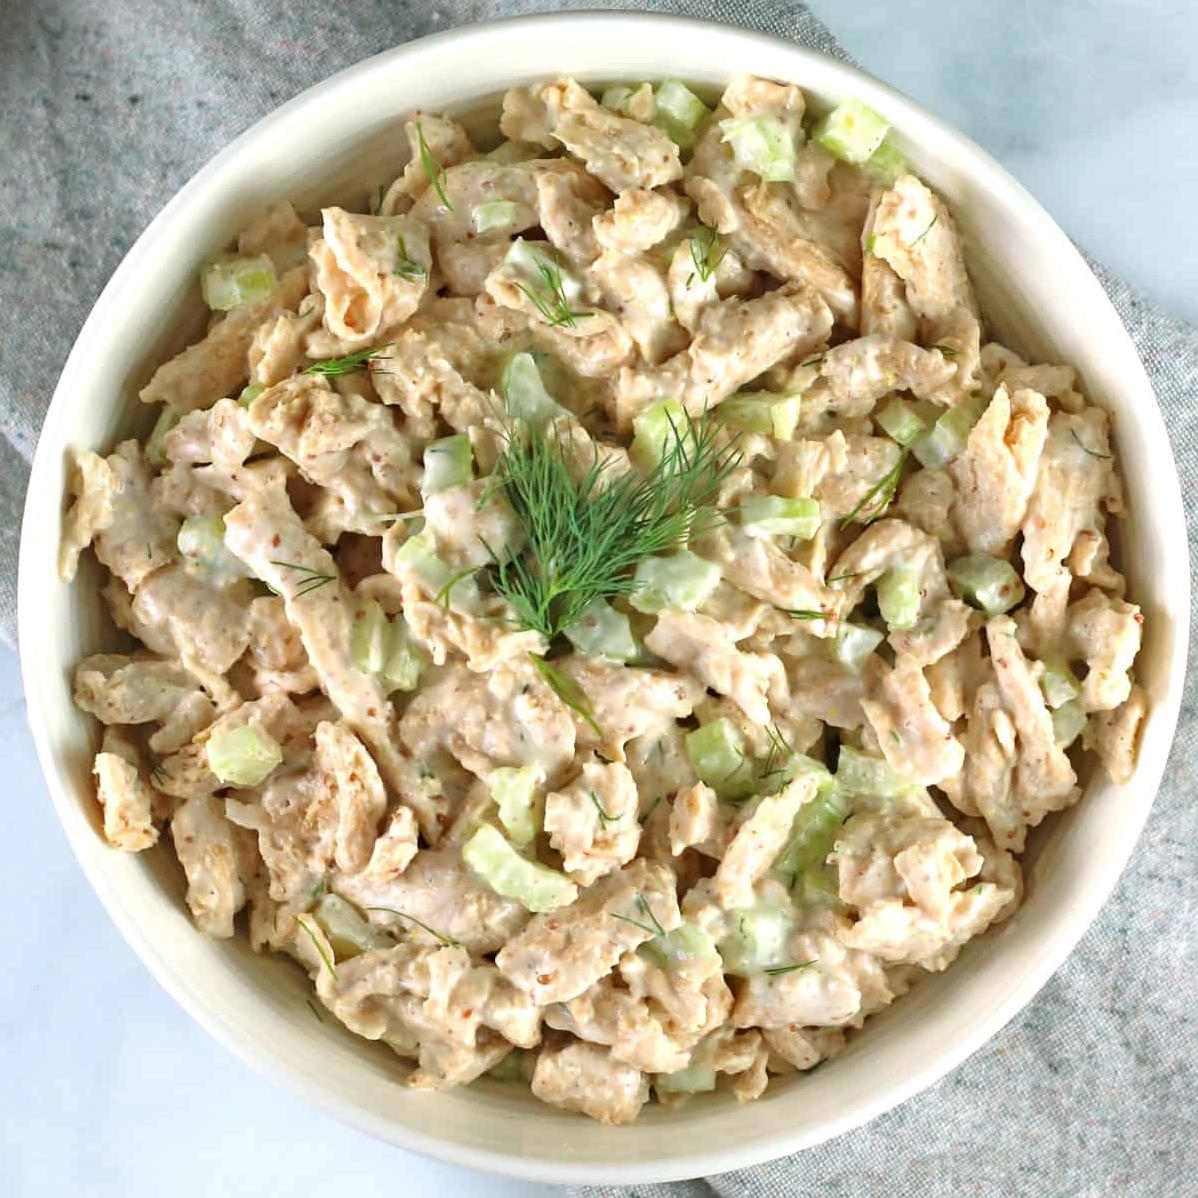  Who says vegan food can’t be delicious? This chicken salad will prove them wrong!